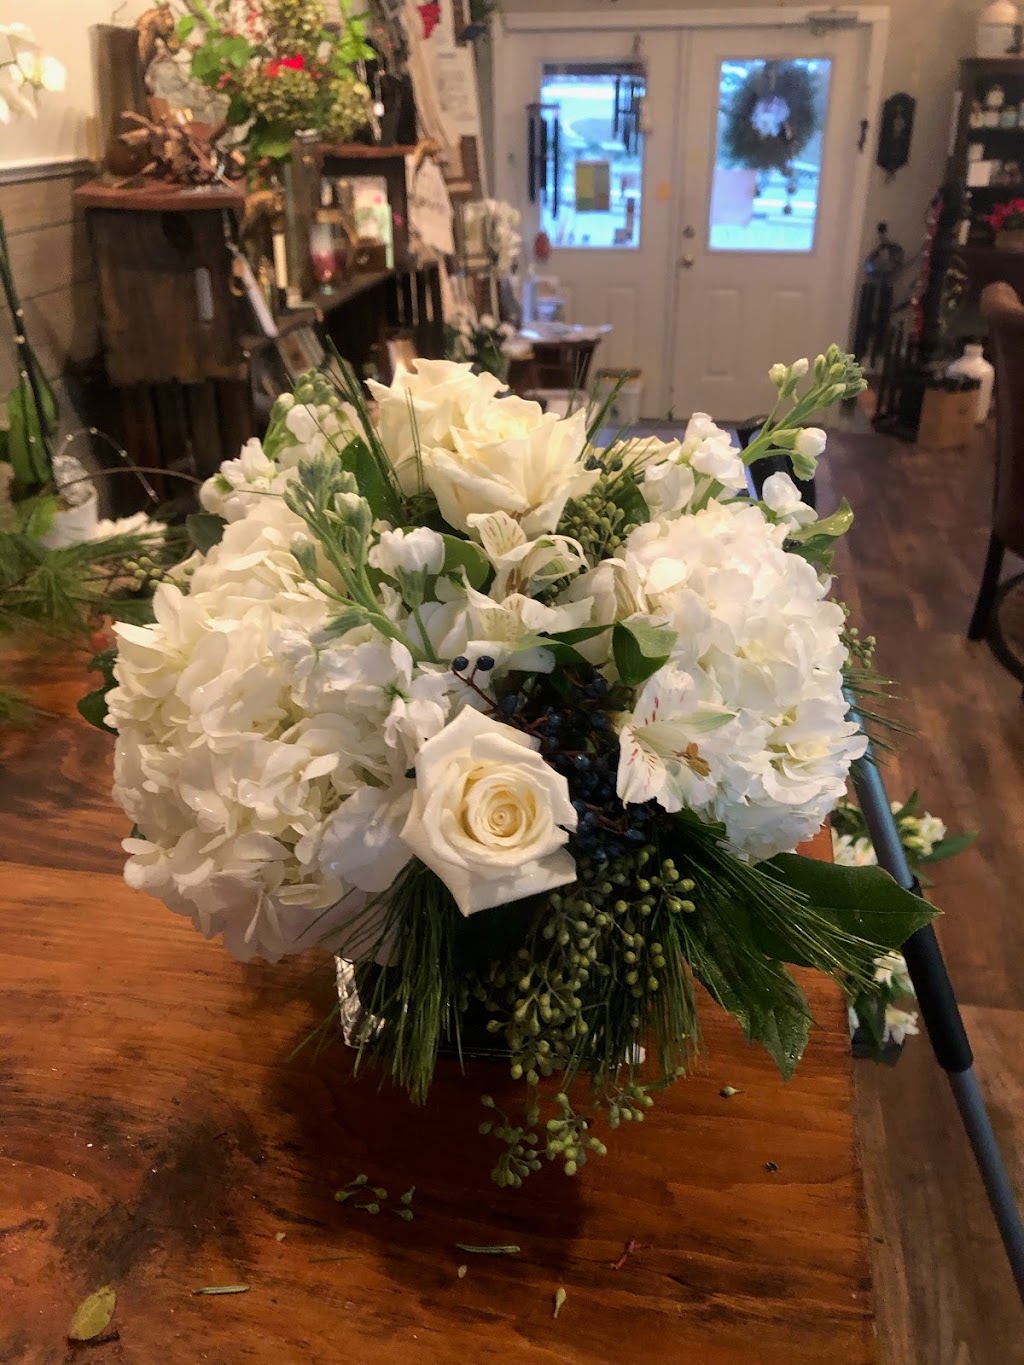 Carriage Barn Florals & Gifts | 389 Smith Ridge Rd, South Salem, NY 10590 | Phone: (914) 533-7390